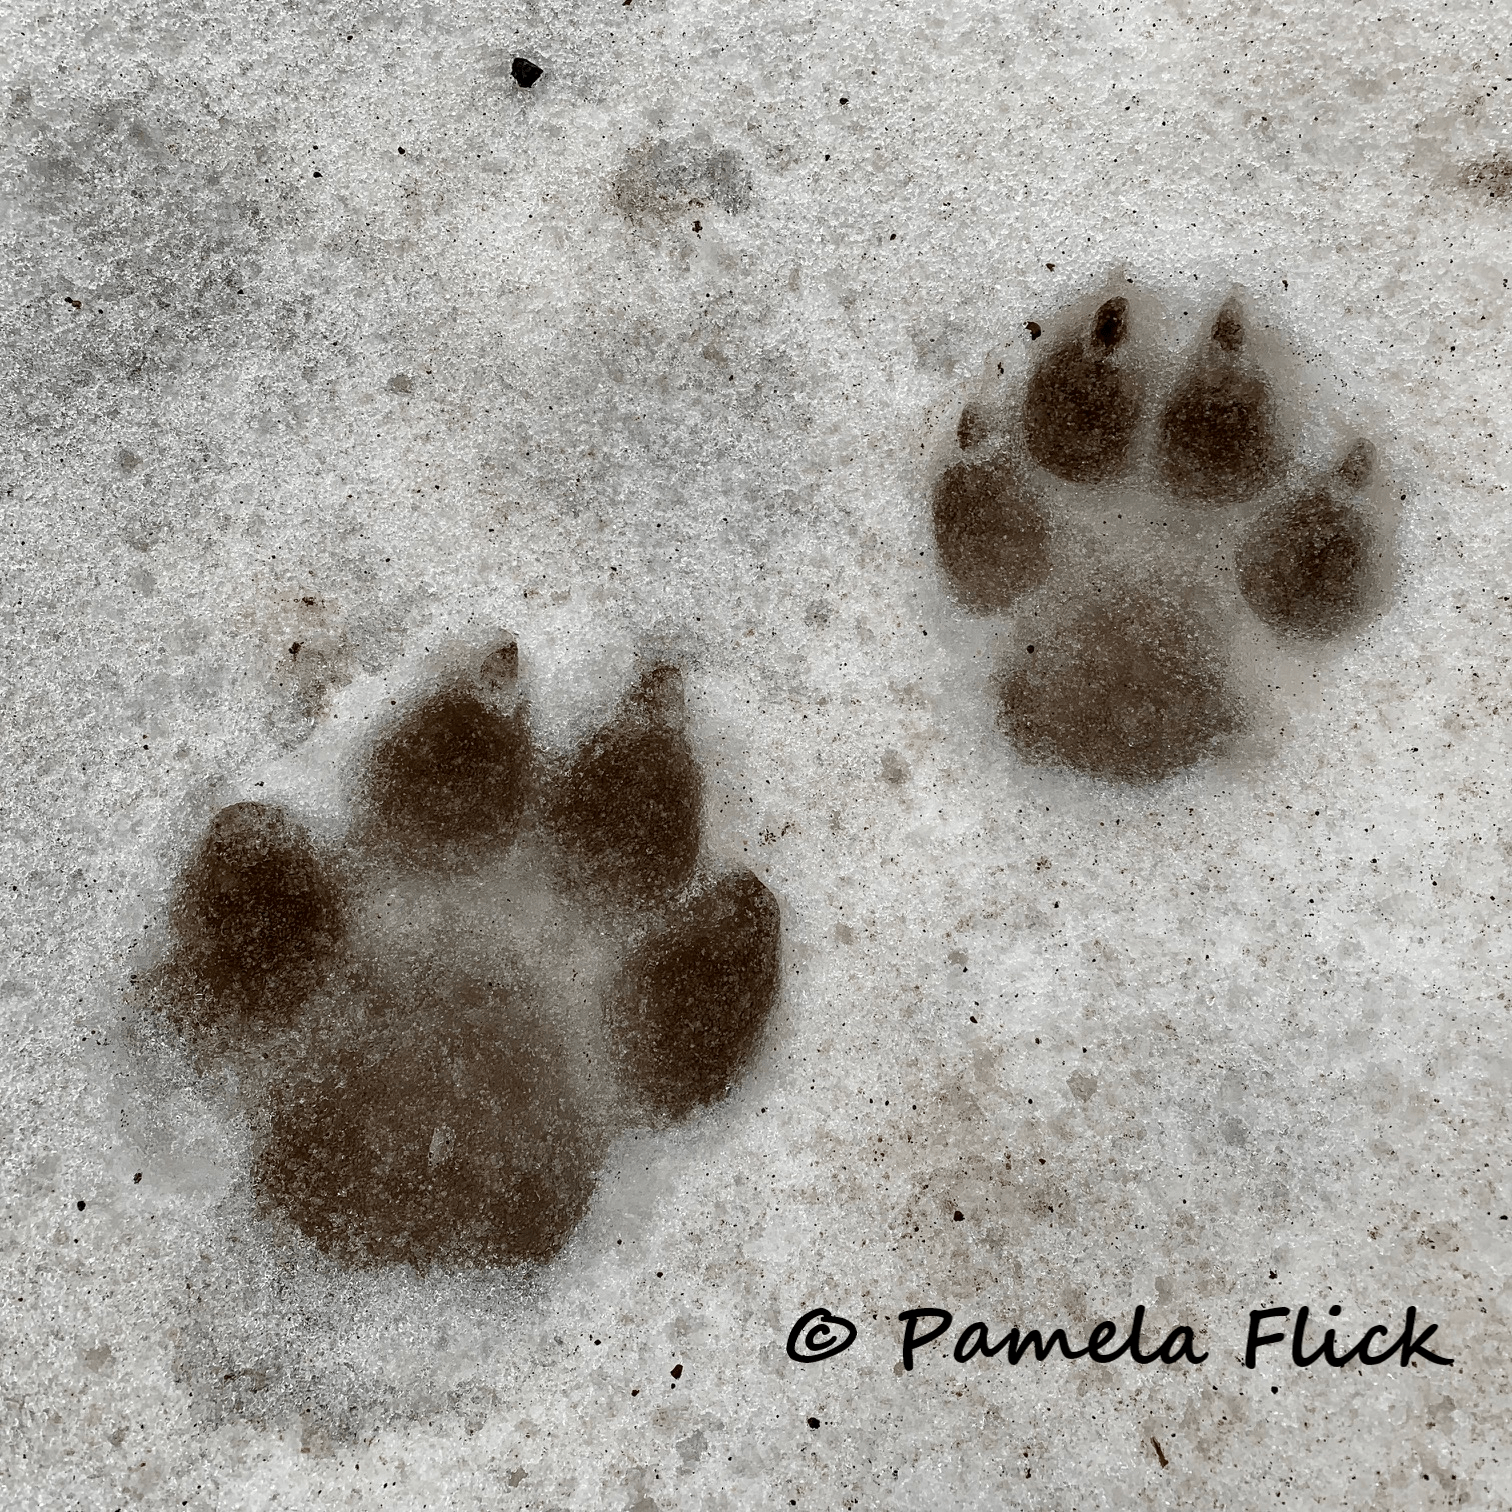 Wolf tracks from the Lassen Pack